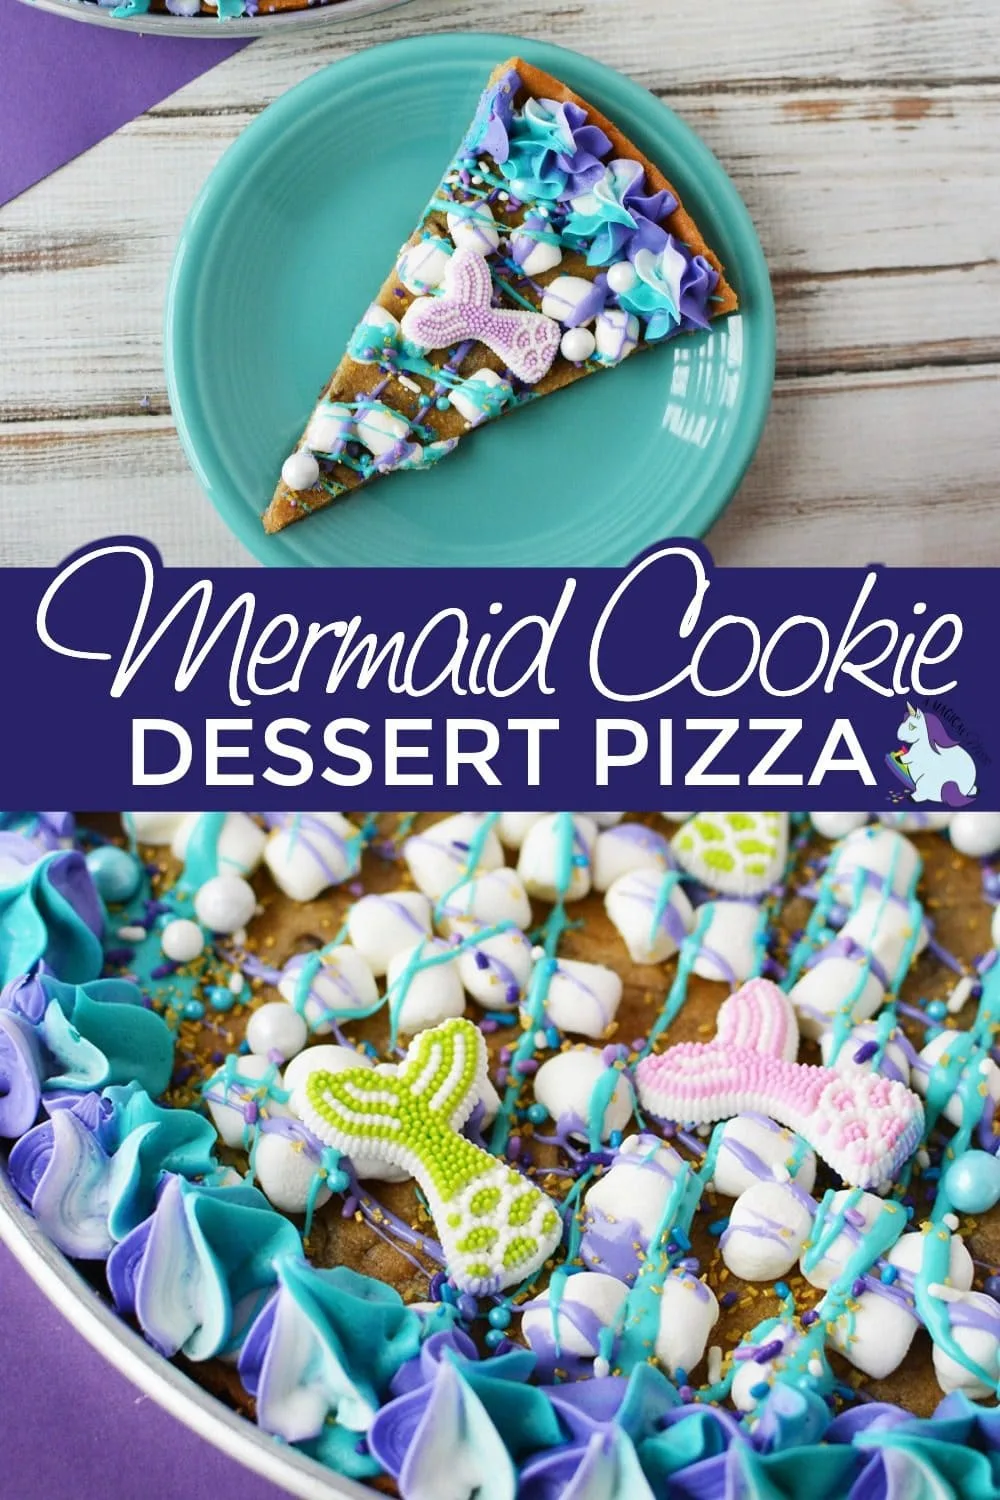 Cookie dessert pizza topped with mermaid decorations.